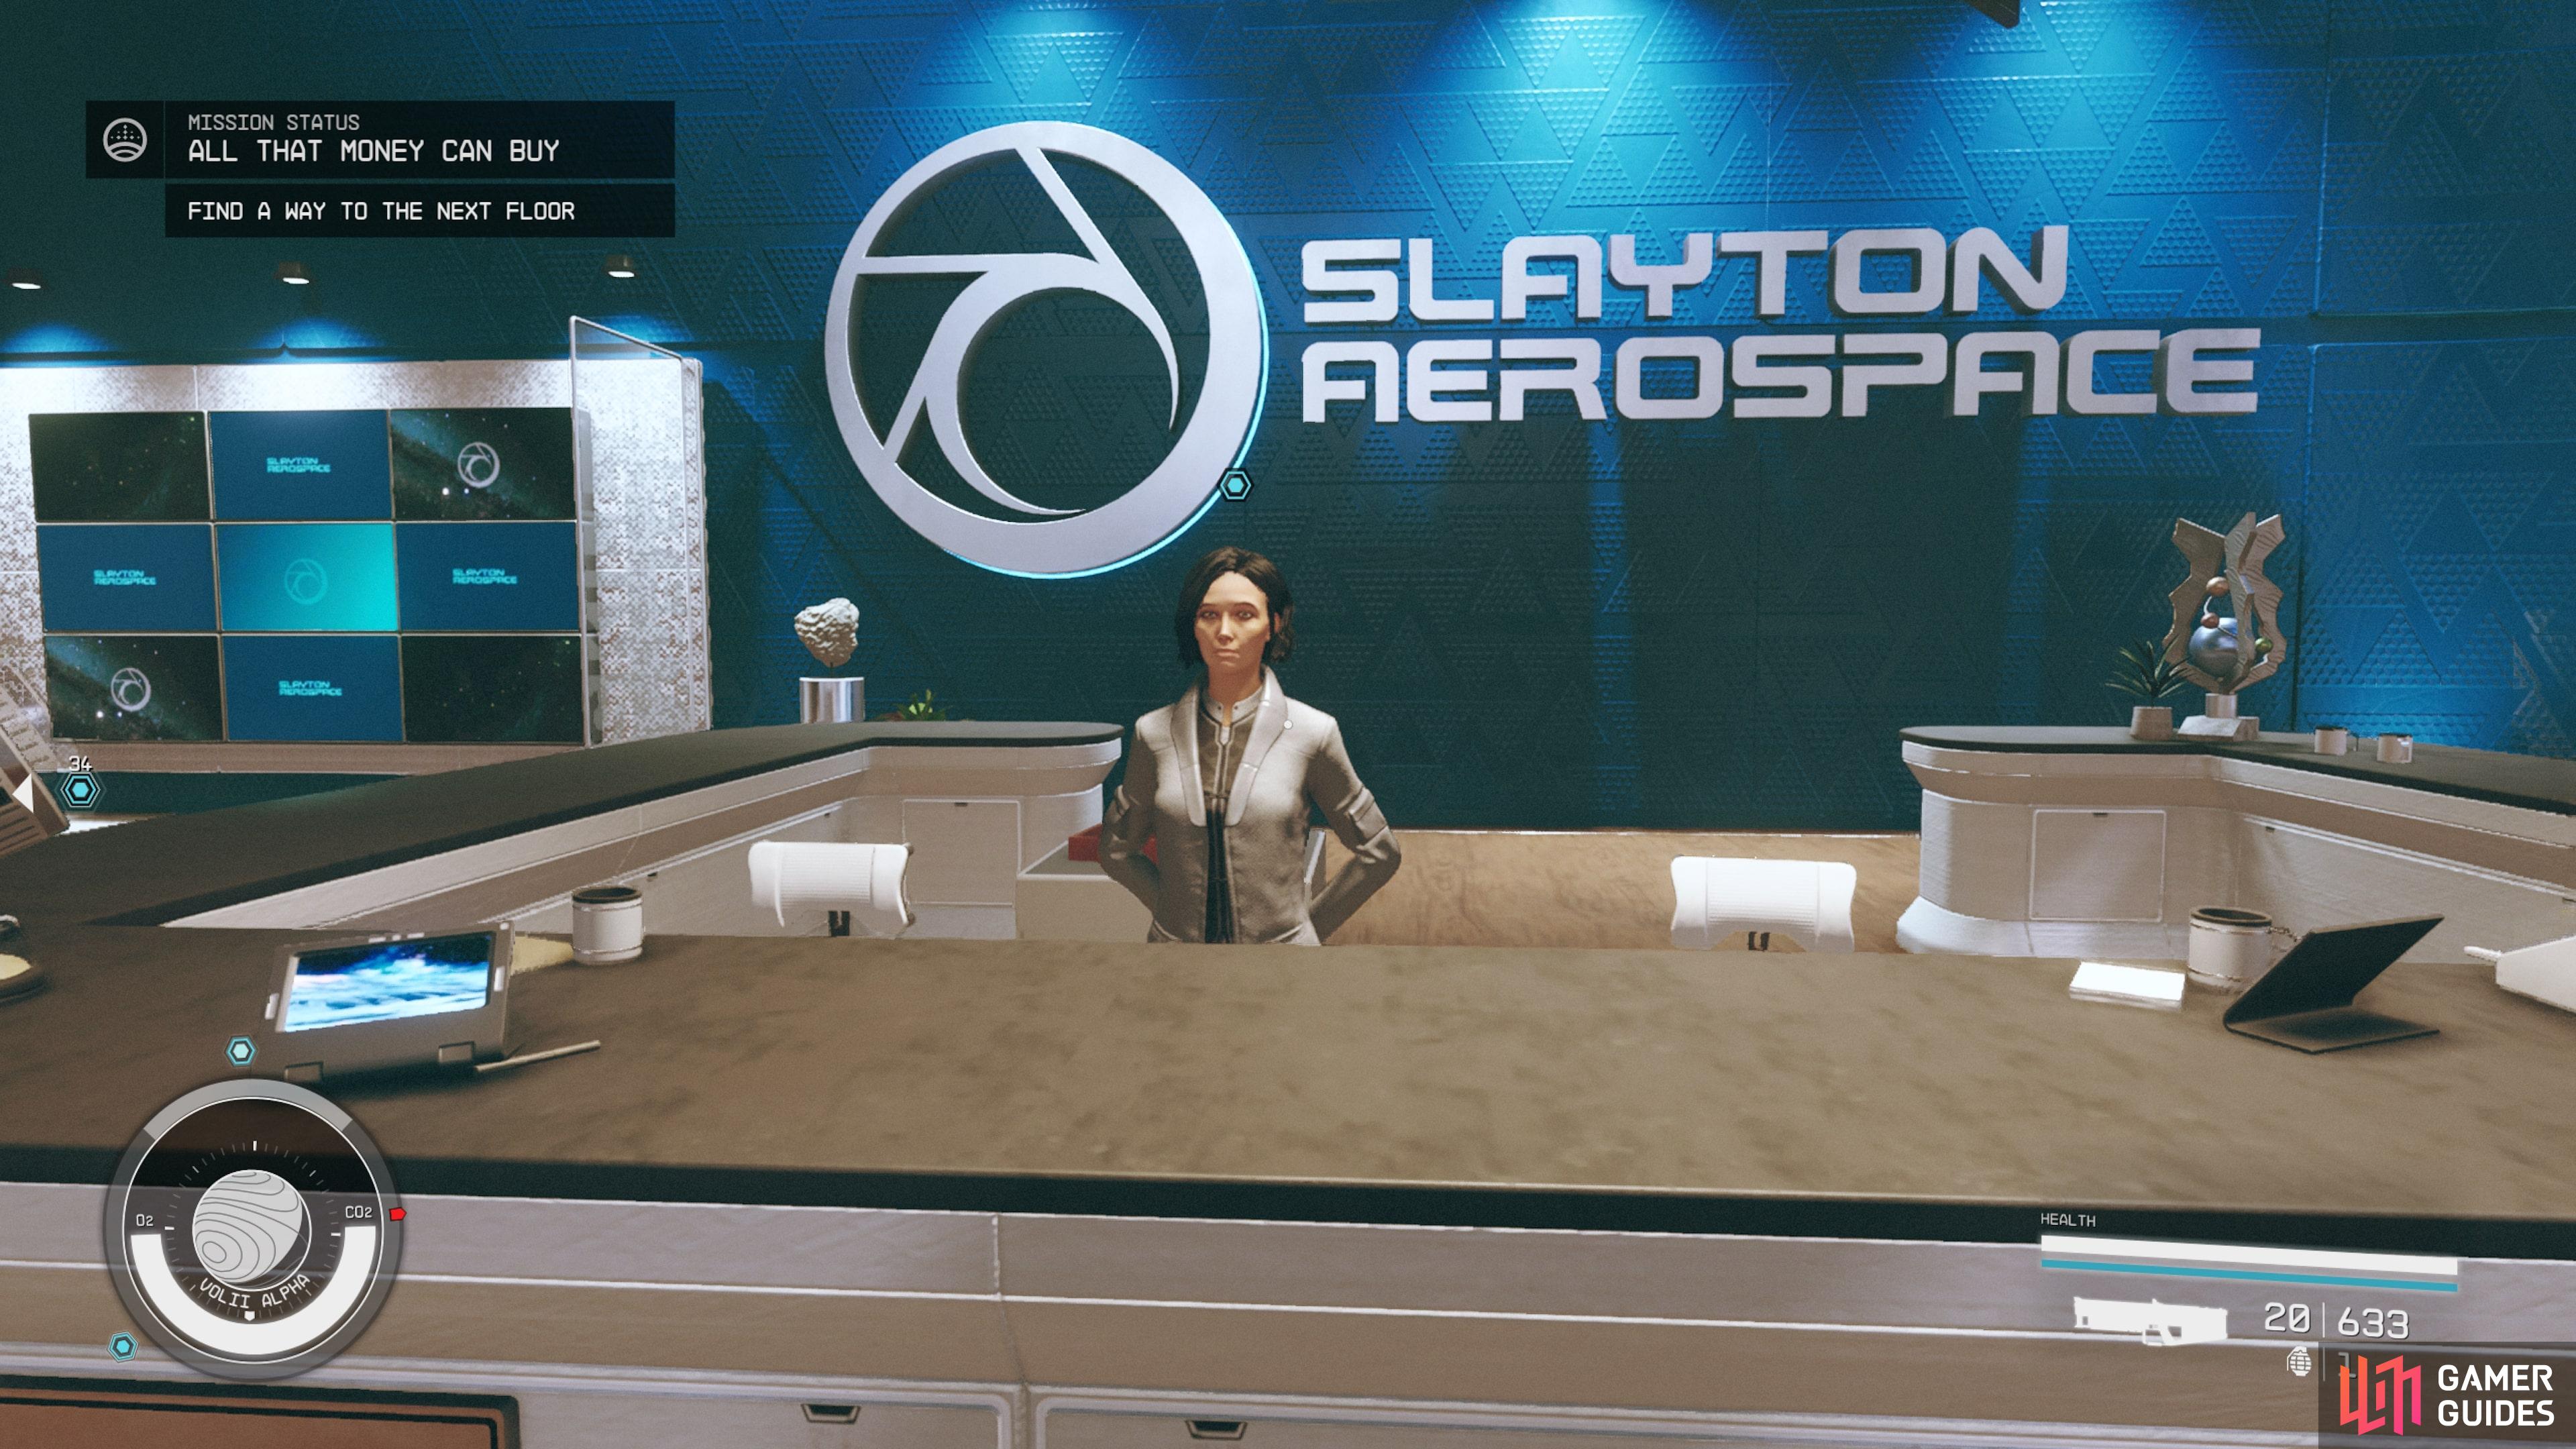 Head to Slayton Aerospace using the elevator marked by your quest marker.